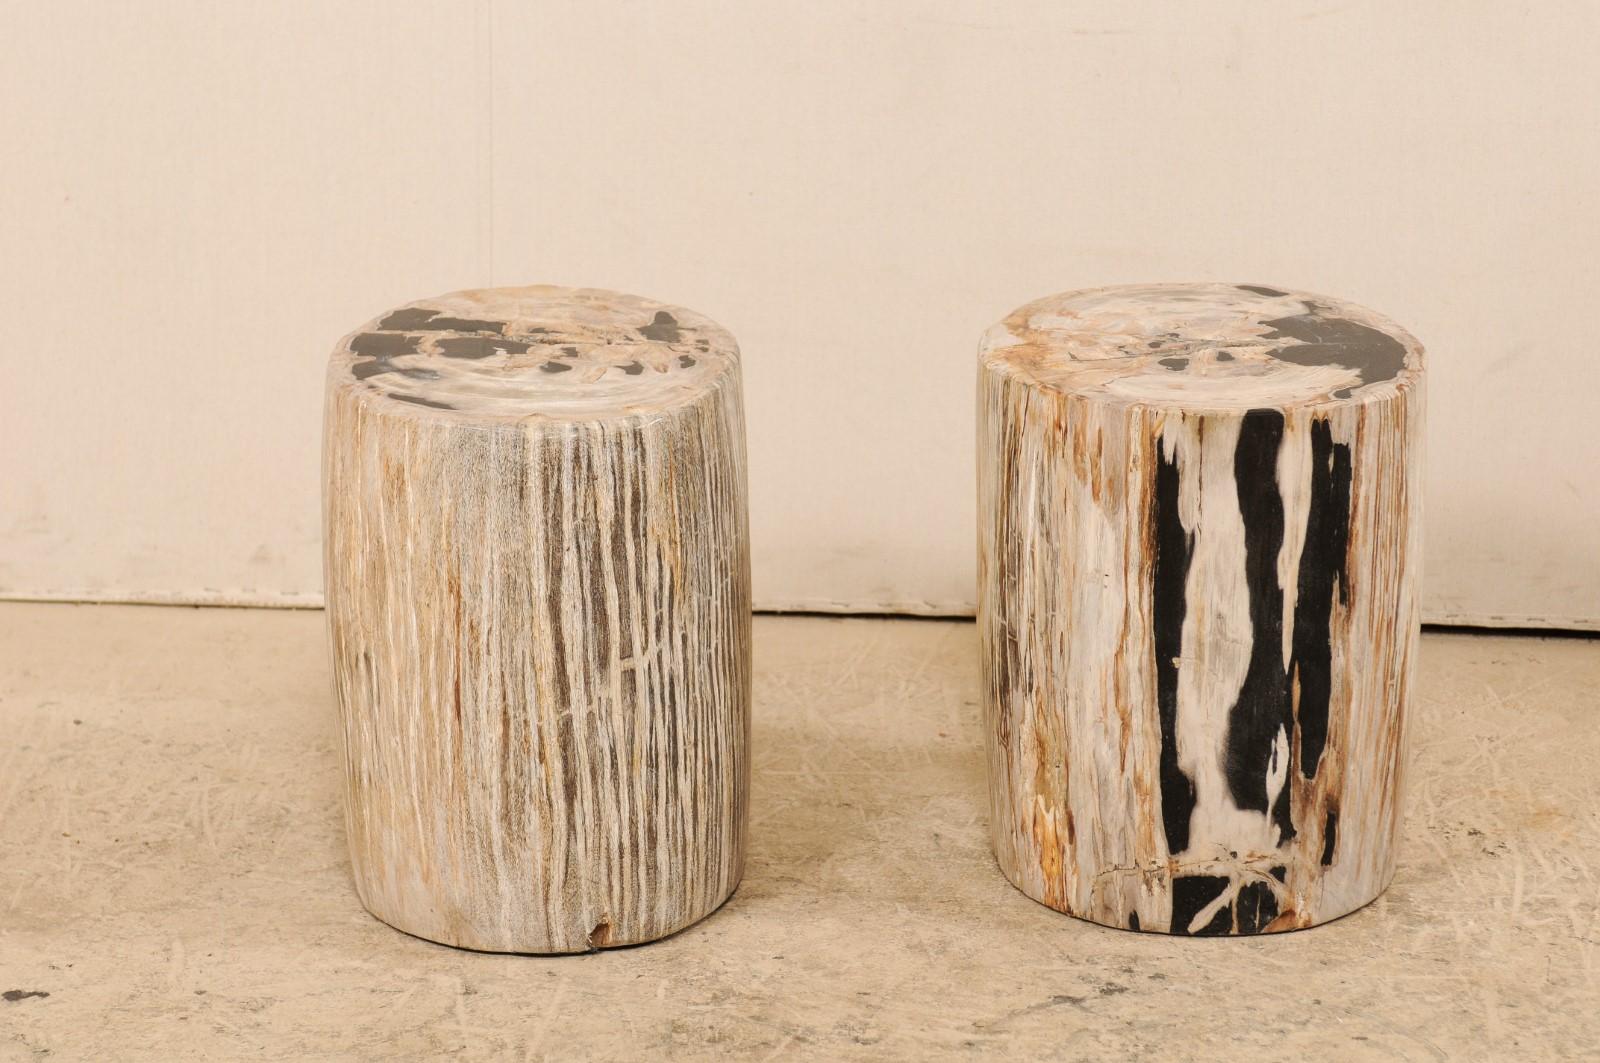 Polished Pair of Petrified Wood Side Tables or Stools in Beautiful Cream and Black Colors